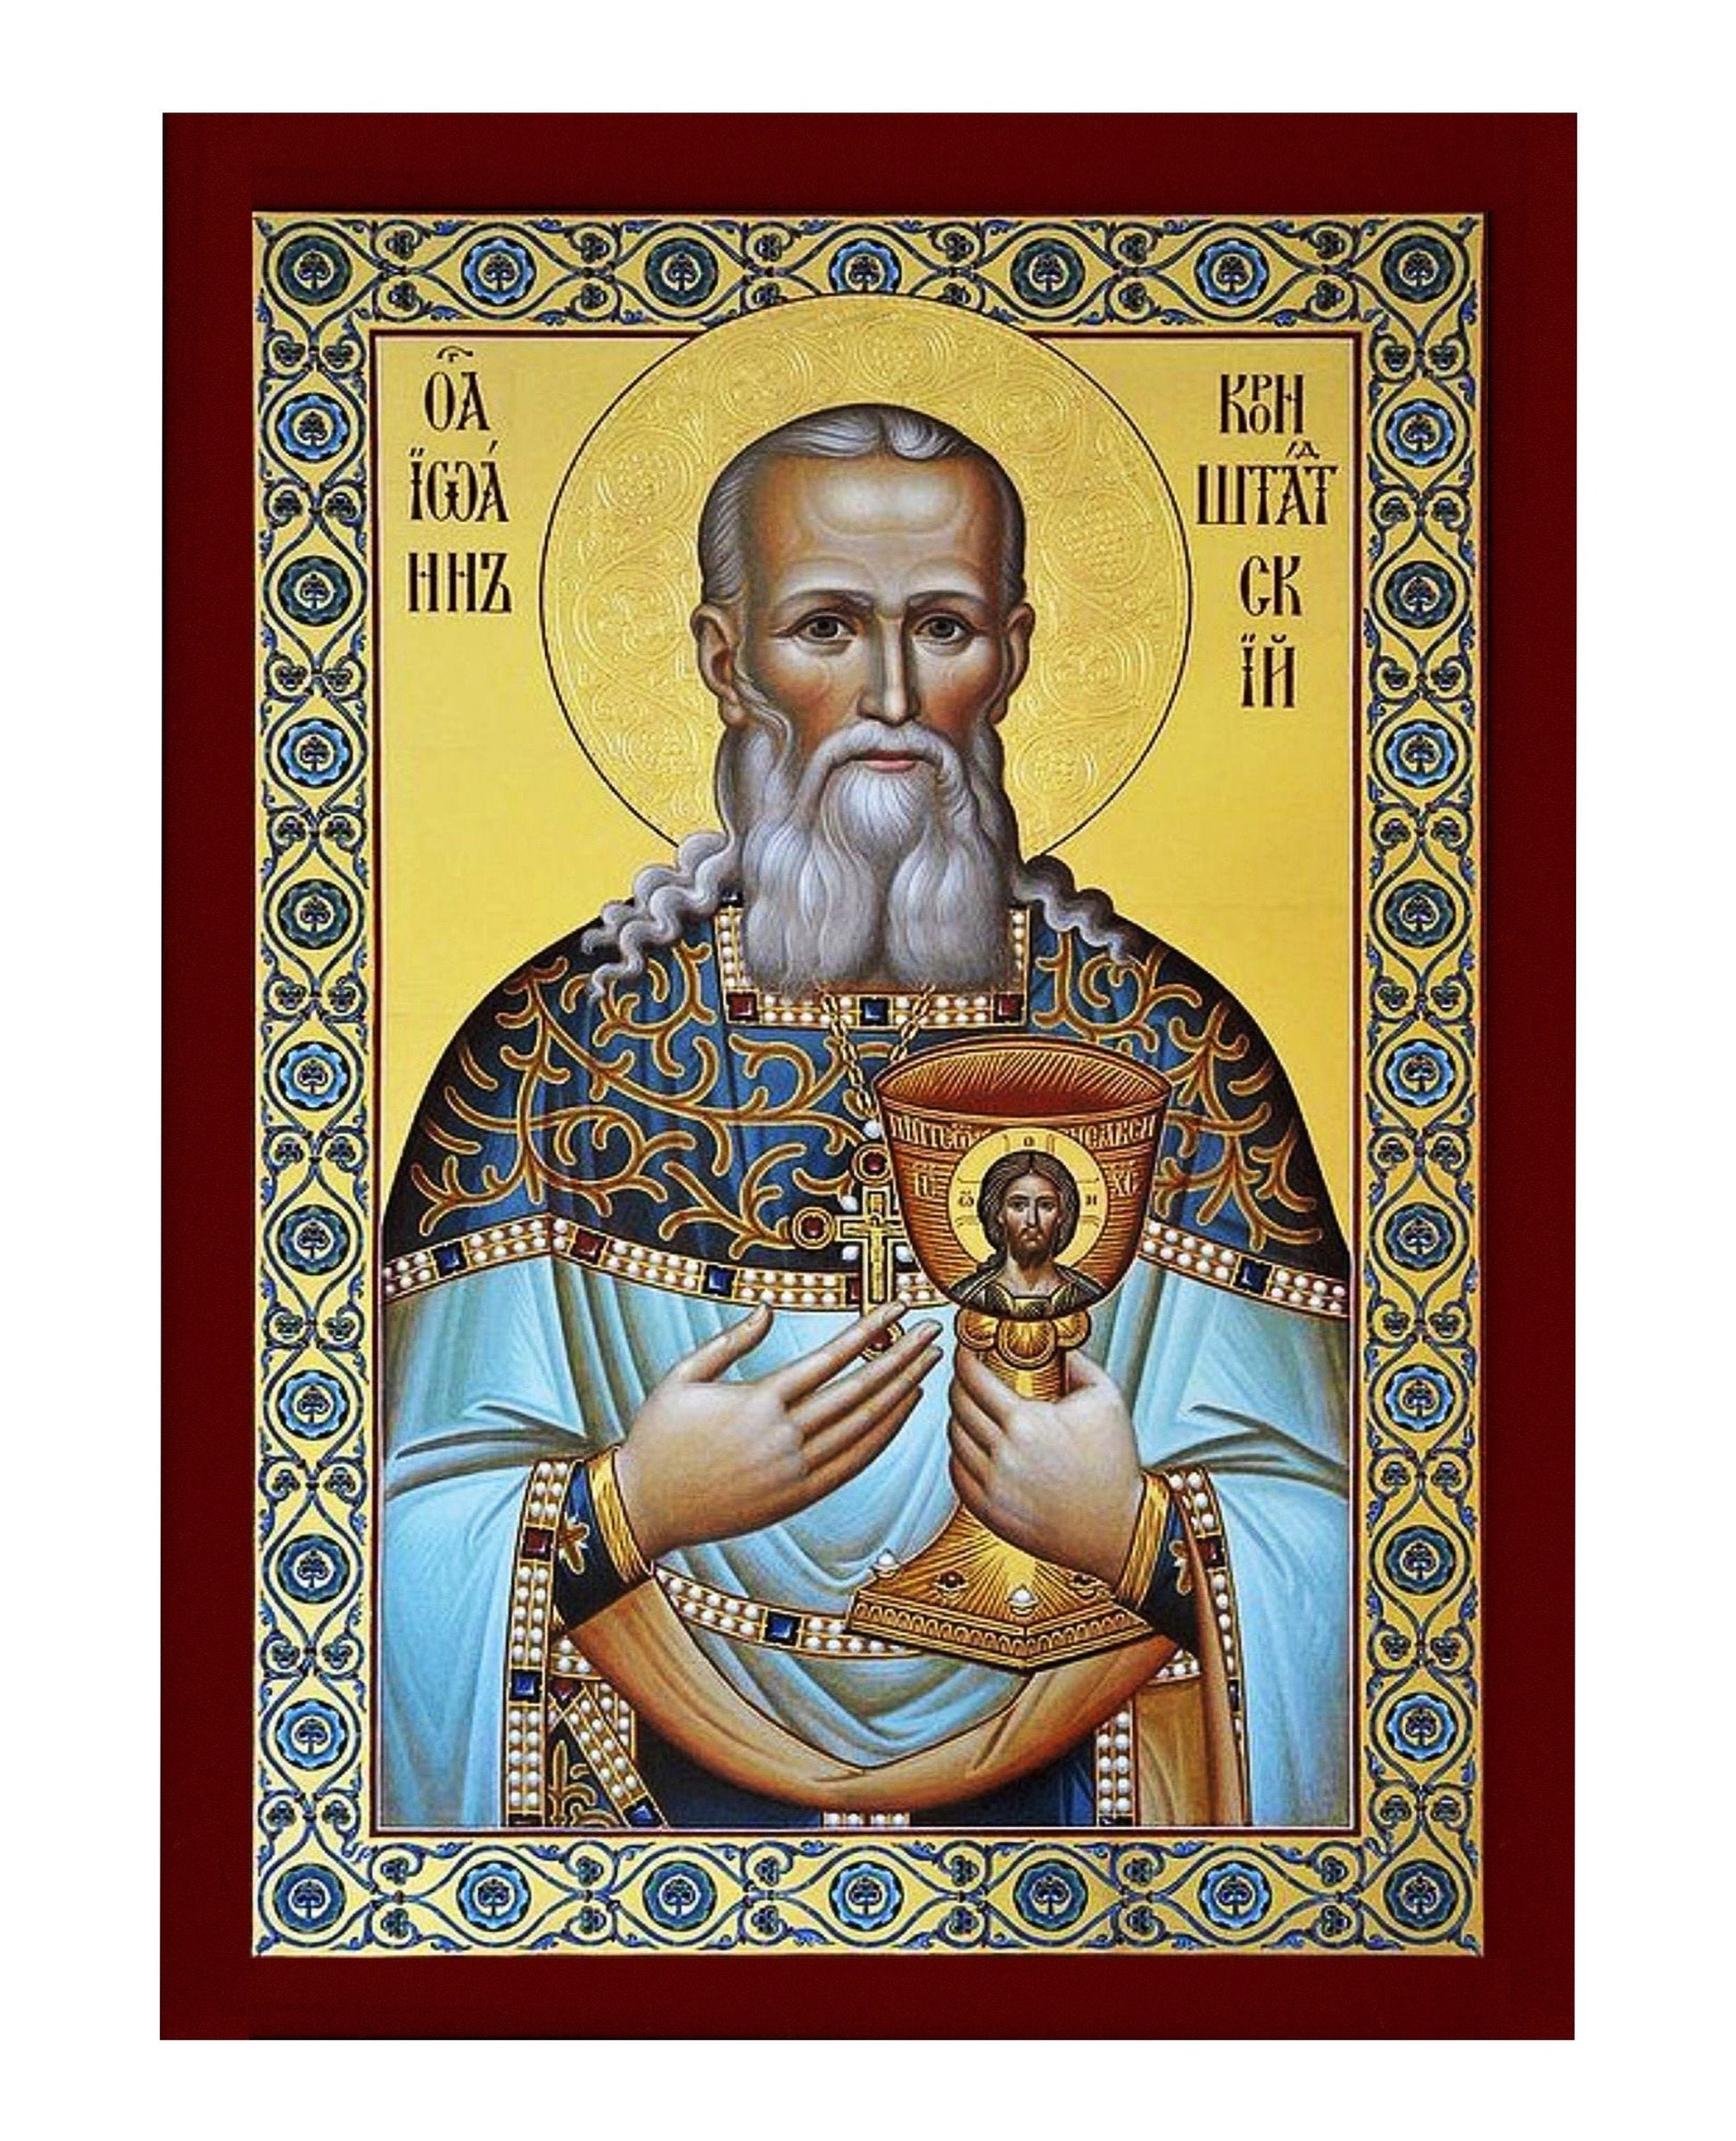 Saint John of Kronstadt icon, Handmade Orthodox Christian icon of St John the Righteous, Religious art wall hanging on wood plaque TheHolyArt